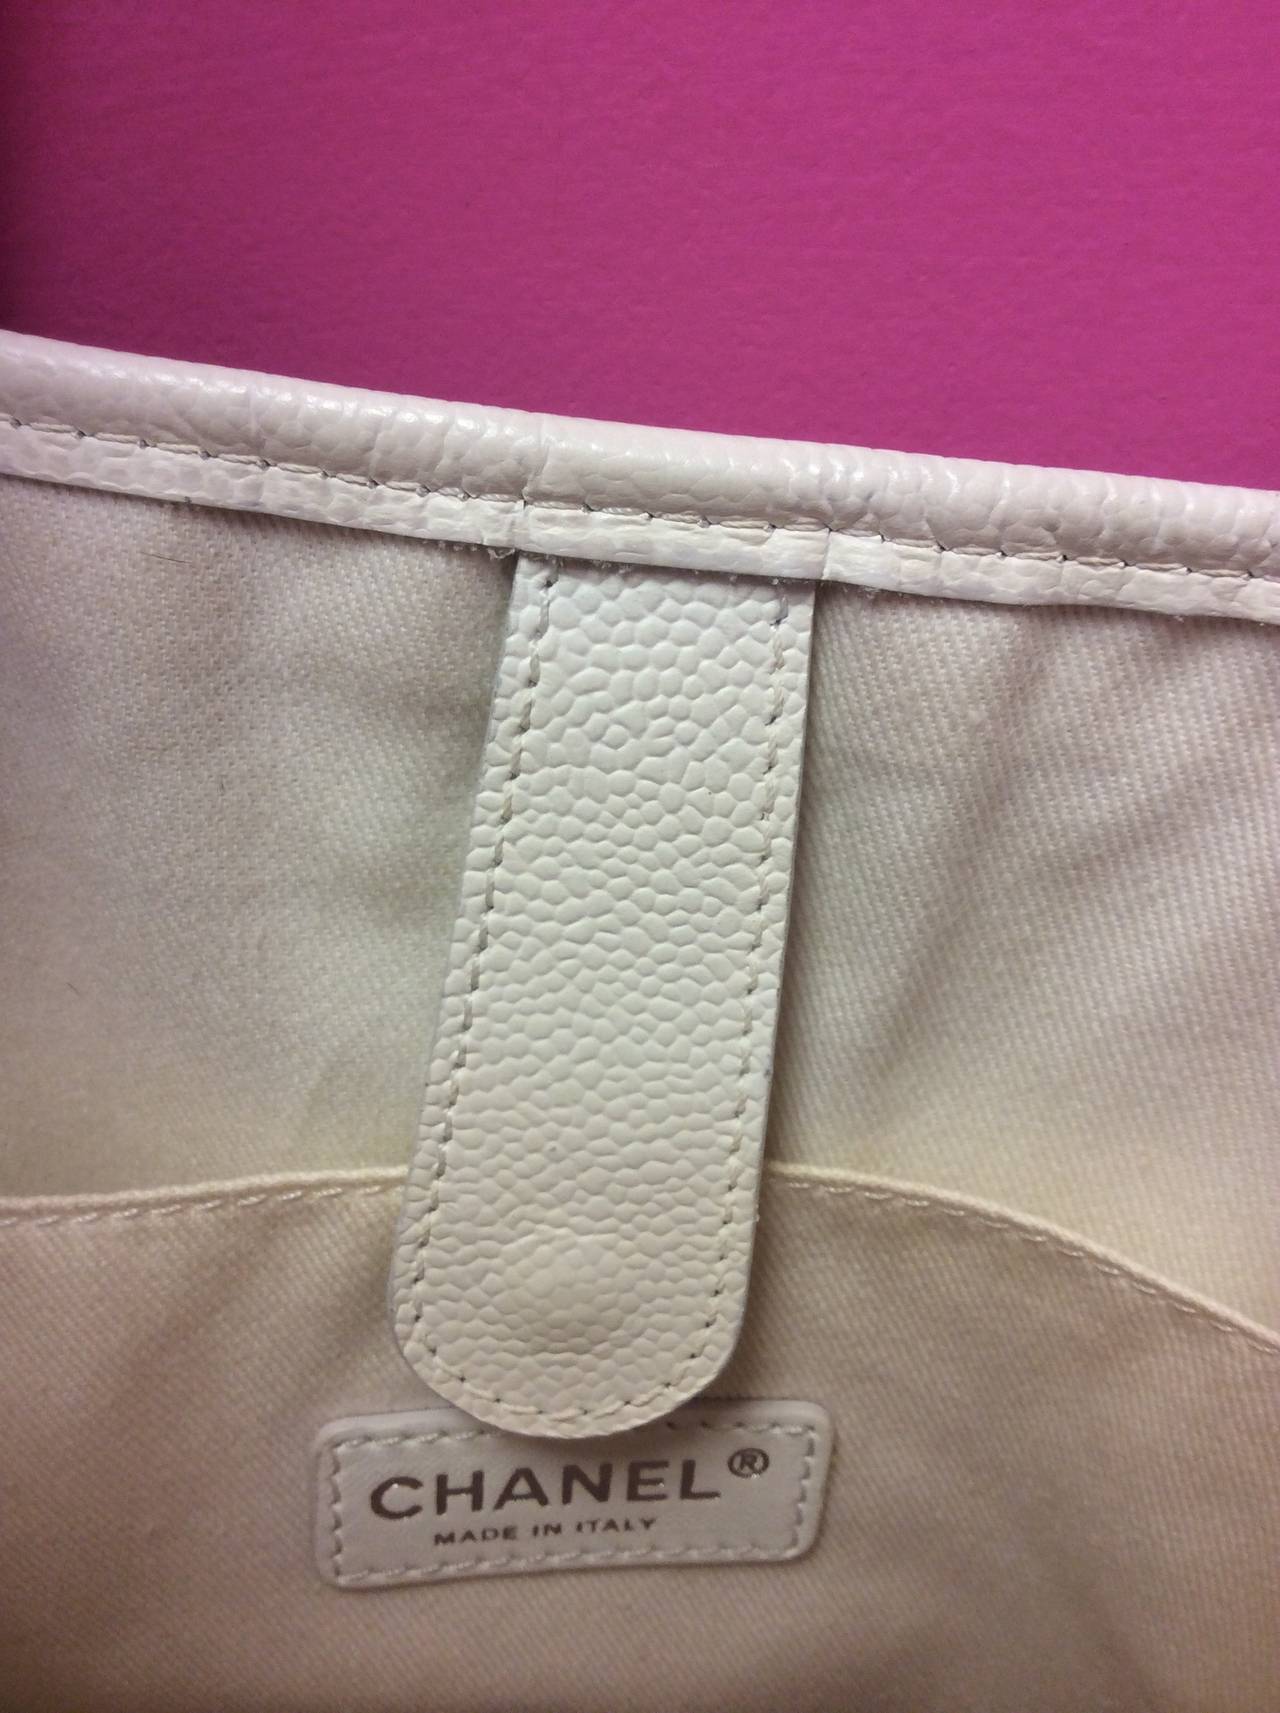 Chanel Cruise Collection Canvas Large Tote 5